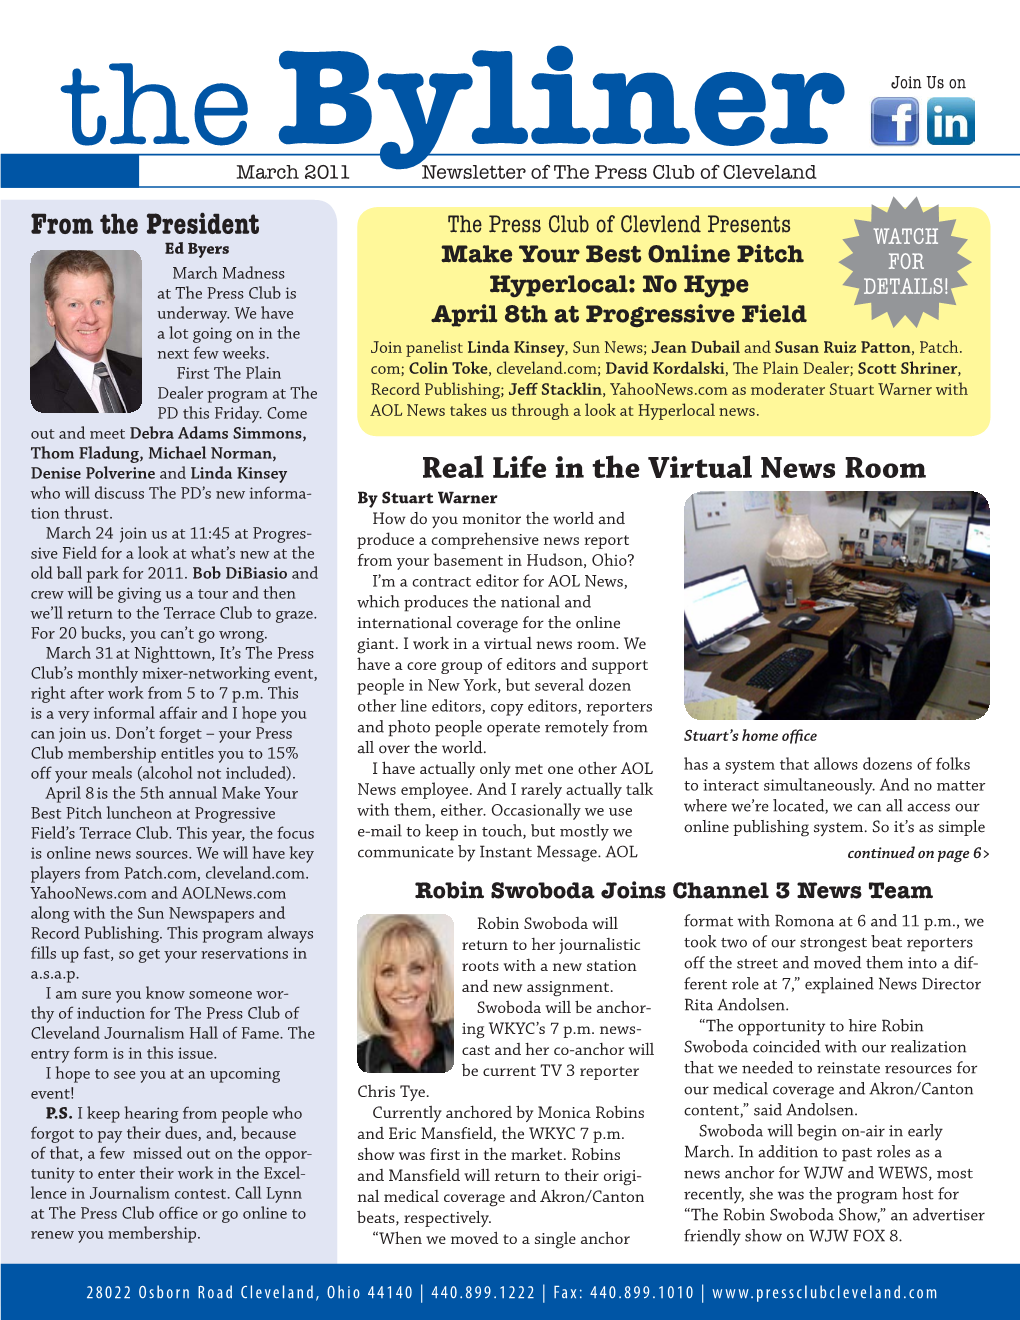 March 2011 Newsletter of the Press Club of Cleveland